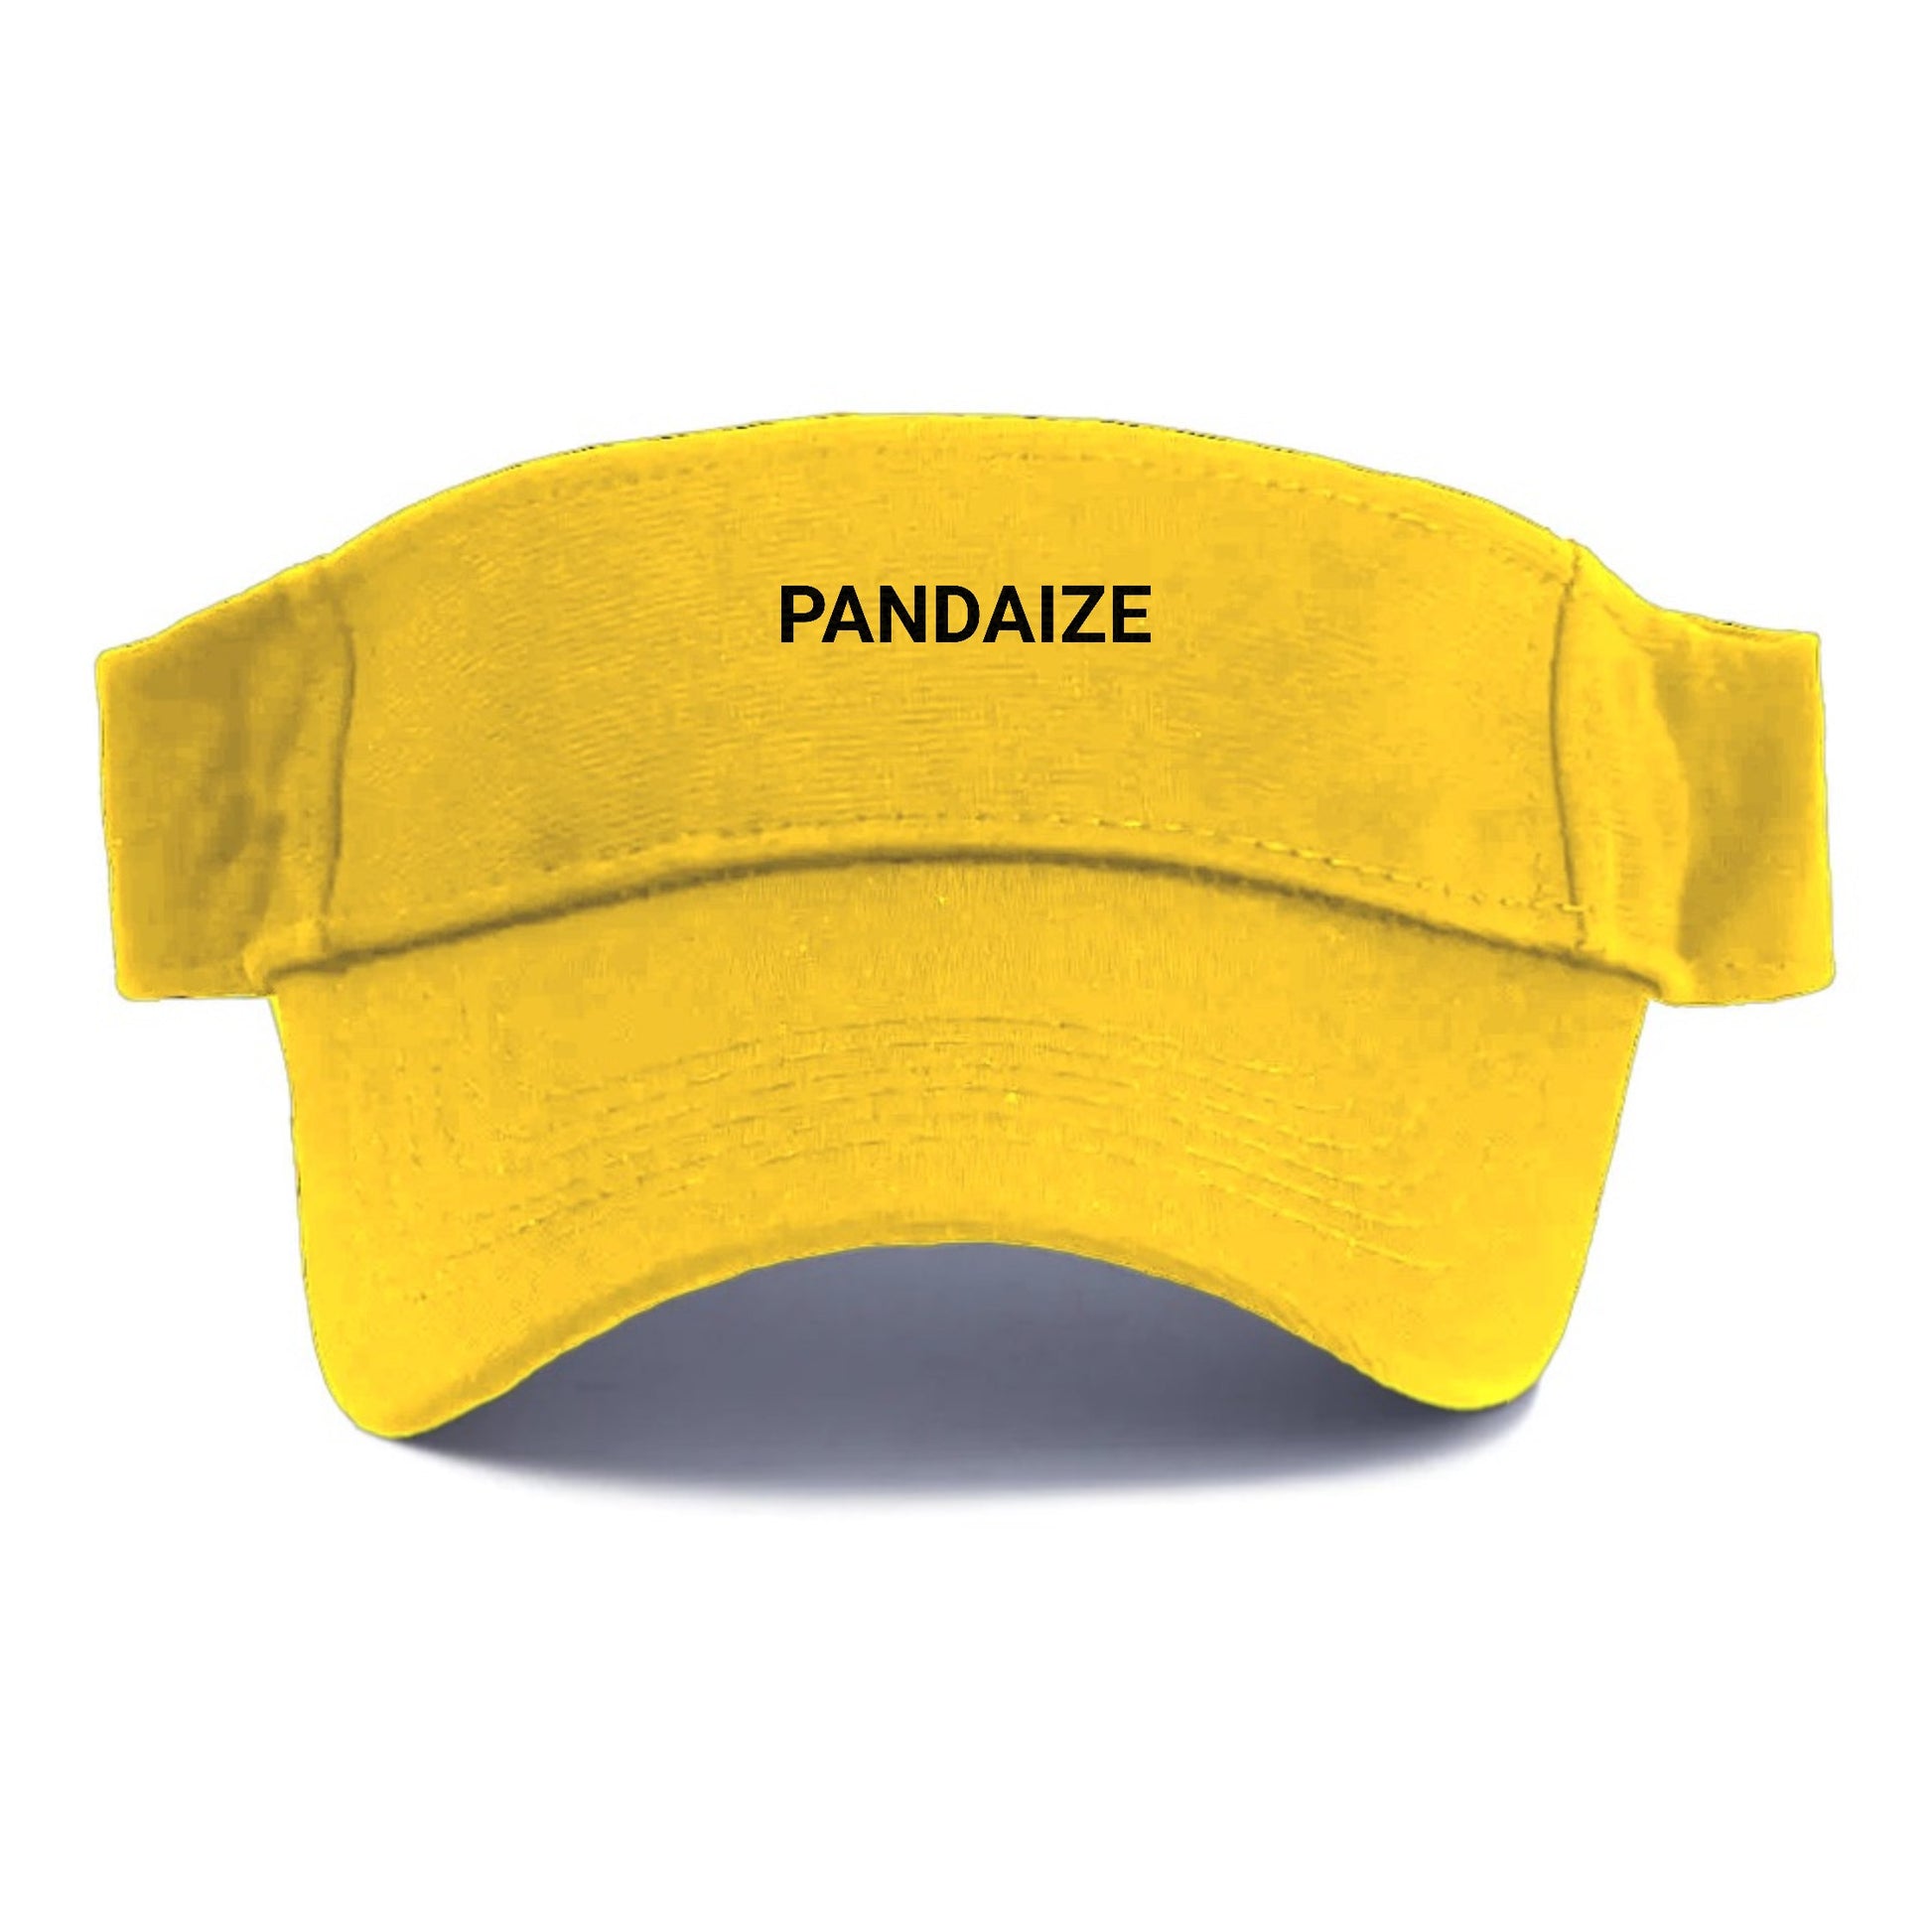 pandaize fitted Hat